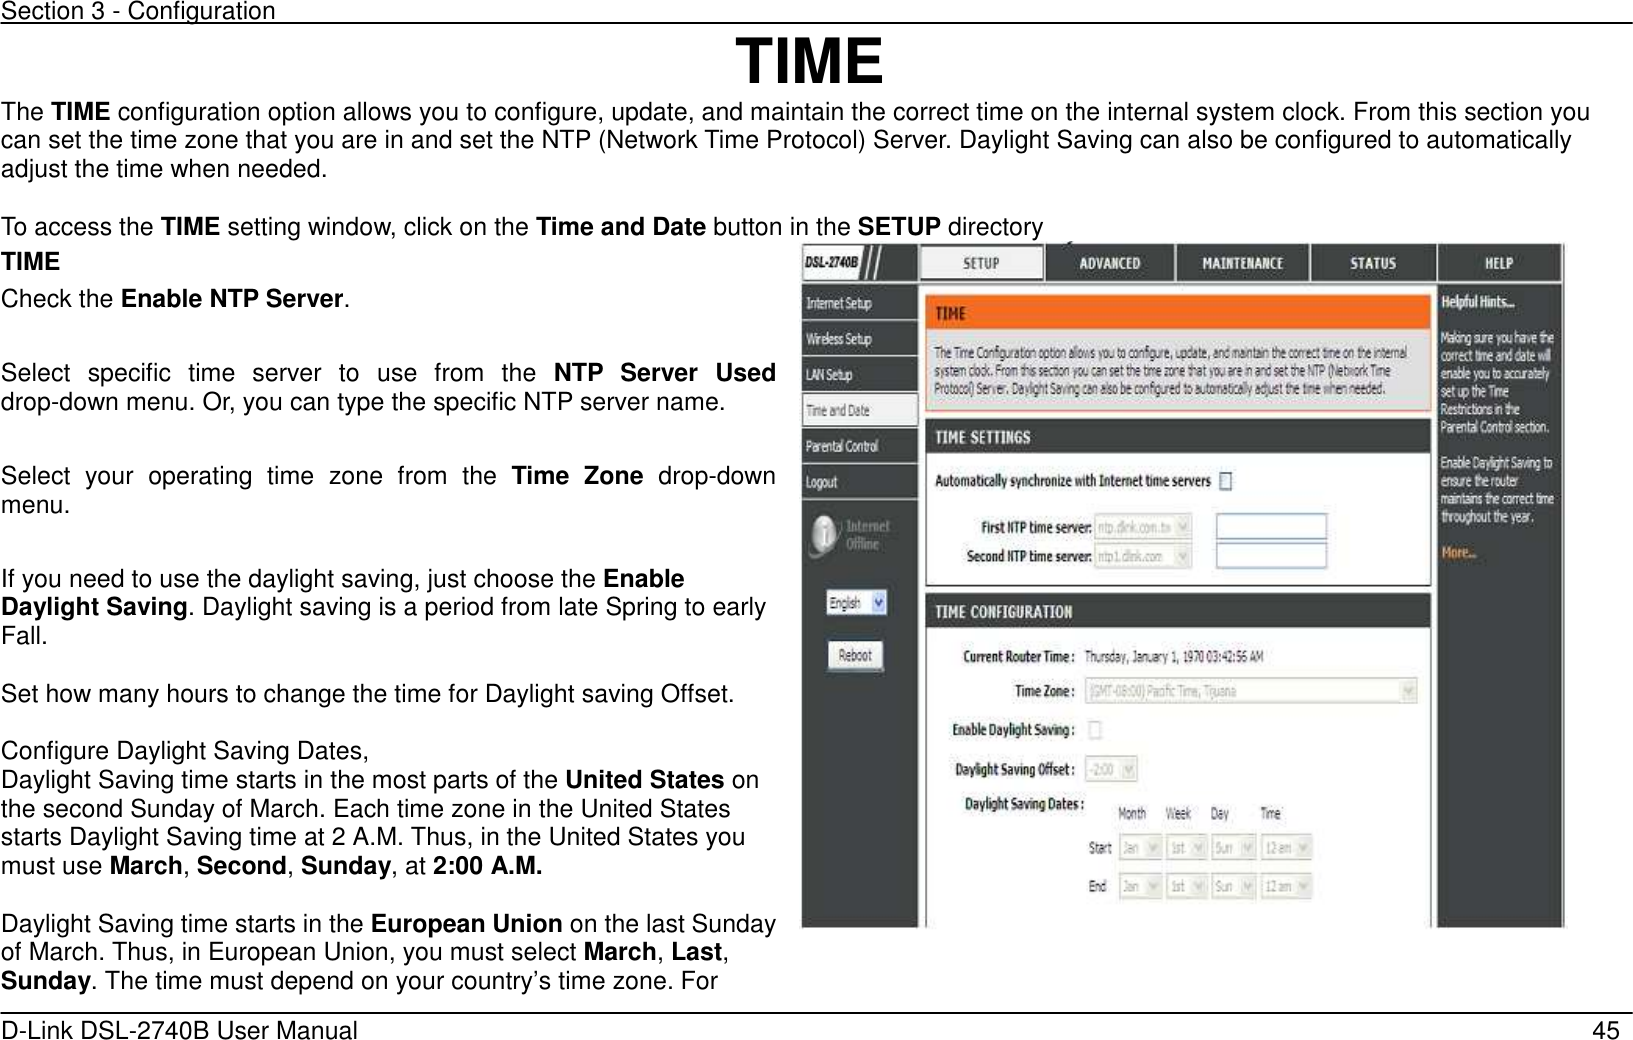 Section 3 - Configuration   D-Link DSL-2740B User Manual                                                  45 TIME The TIME configuration option allows you to configure, update, and maintain the correct time on the internal system clock. From this section you can set the time zone that you are in and set the NTP (Network Time Protocol) Server. Daylight Saving can also be configured to automatically adjust the time when needed.  To access the TIME setting window, click on the Time and Date button in the SETUP directory TIME Check the Enable NTP Server.  Select  specific  time  server  to  use  from  the  NTP  Server  Used drop-down menu. Or, you can type the specific NTP server name.  Select  your  operating  time  zone  from  the  Time  Zone  drop-down menu.  If you need to use the daylight saving, just choose the Enable Daylight Saving. Daylight saving is a period from late Spring to early Fall.      Set how many hours to change the time for Daylight saving Offset.  Configure Daylight Saving Dates,   Daylight Saving time starts in the most parts of the United States on the second Sunday of March. Each time zone in the United States starts Daylight Saving time at 2 A.M. Thus, in the United States you must use March, Second, Sunday, at 2:00 A.M.    Daylight Saving time starts in the European Union on the last Sunday of March. Thus, in European Union, you must select March, Last, Sunday. The time must depend on your country’s time zone. For    